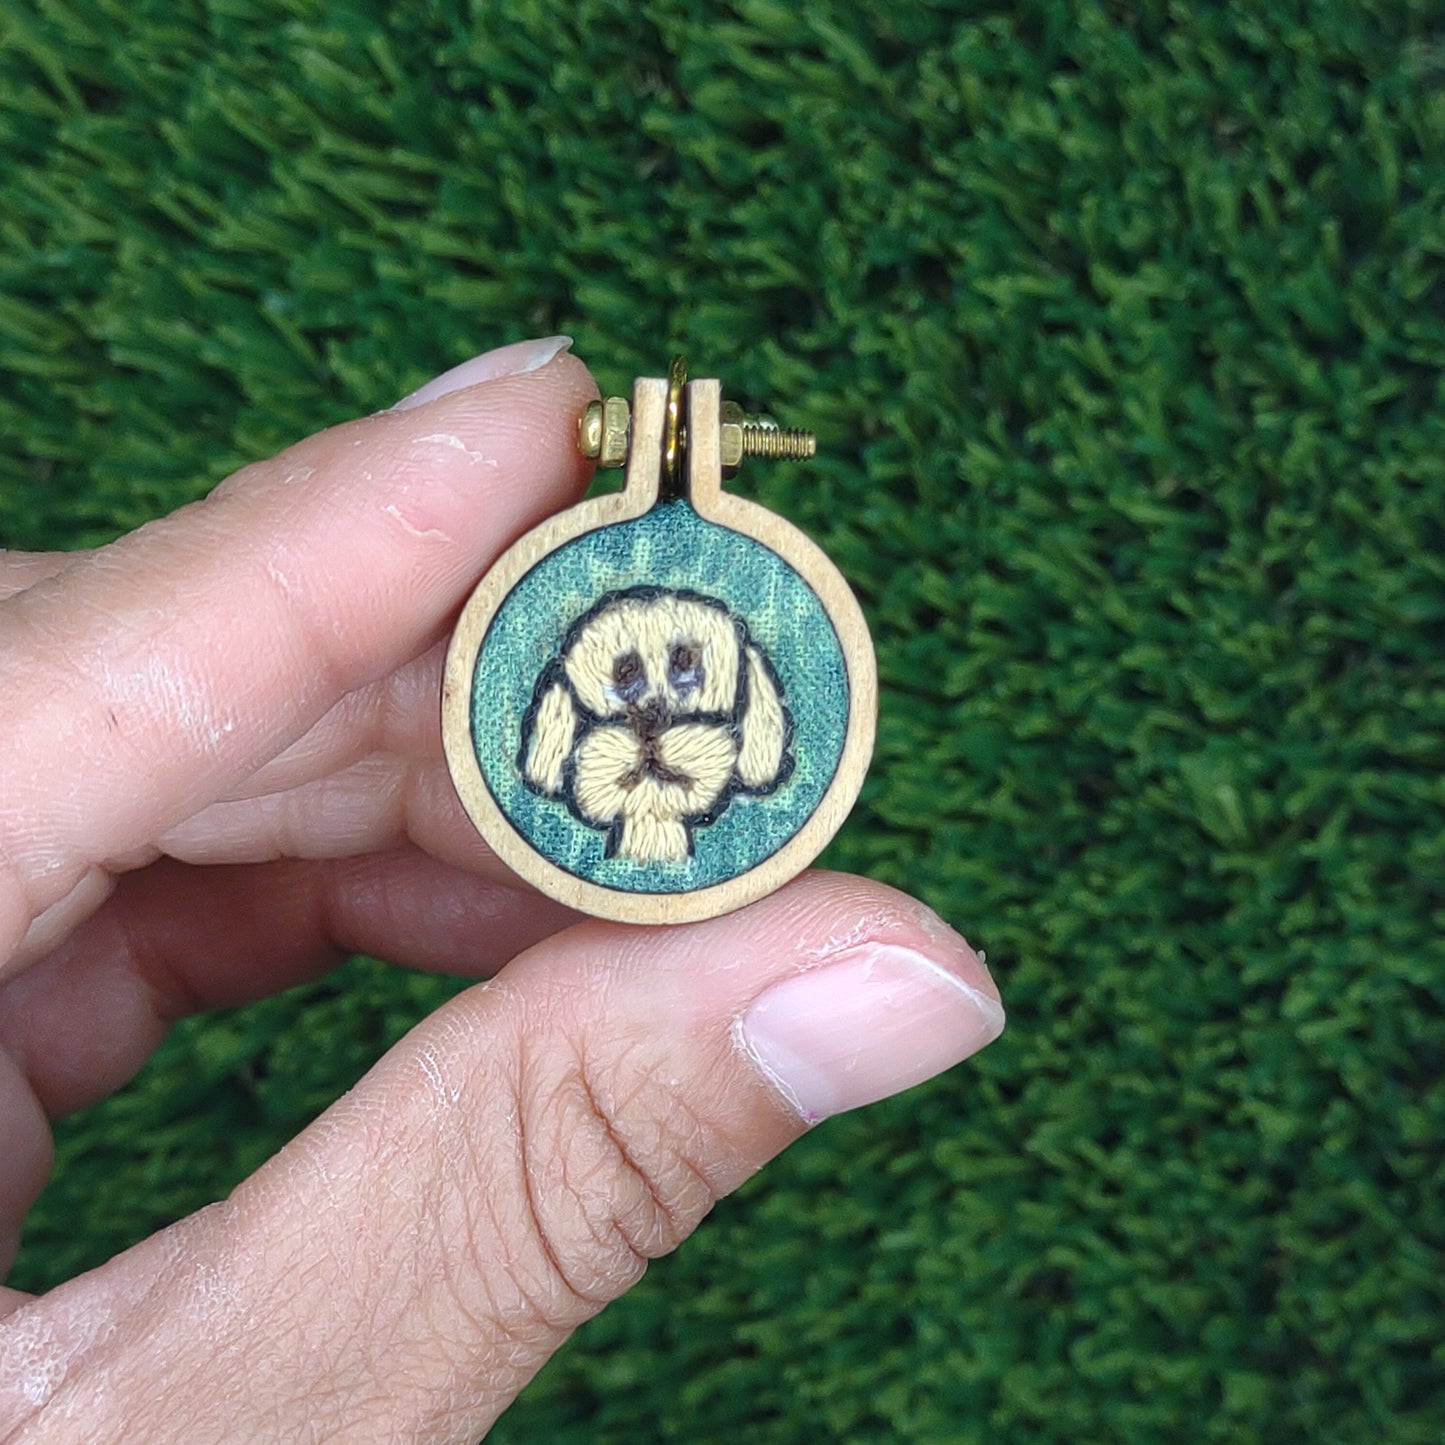 Hand Embroidered Cute Dog Pendant for Necklace or Keychain